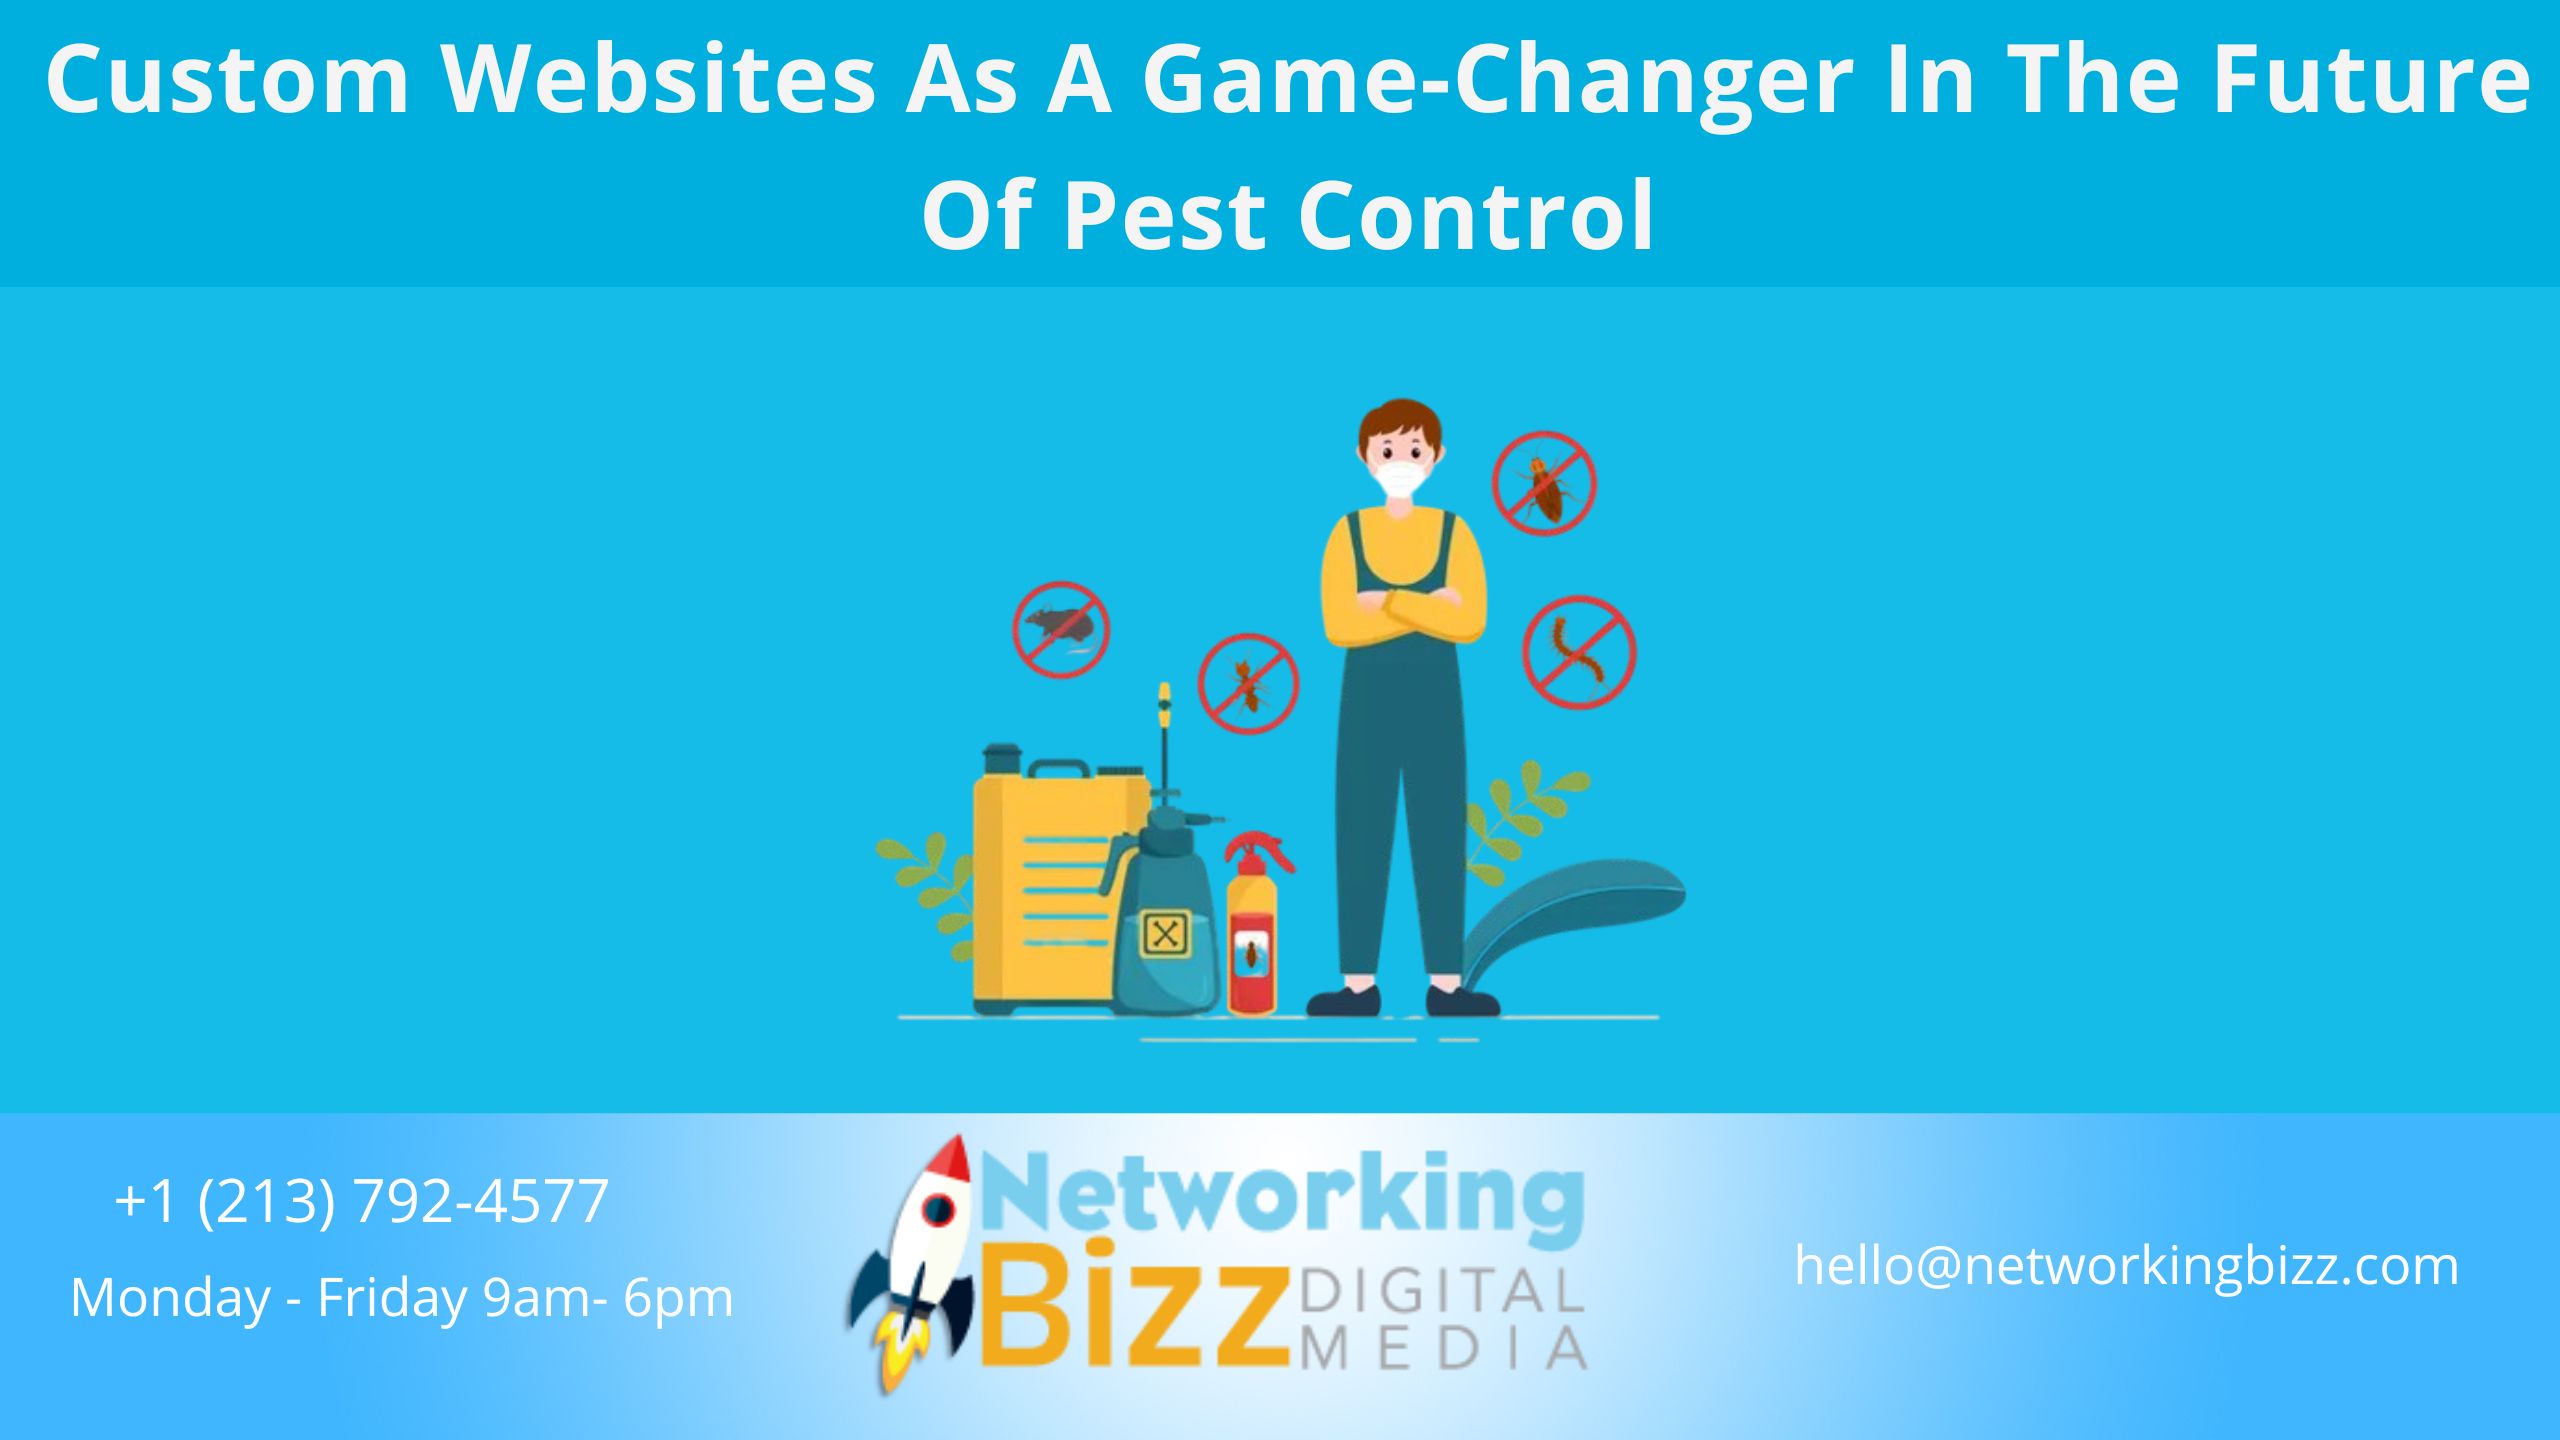 Custom Websites As A Game-Changer In The Future Of Pest Control